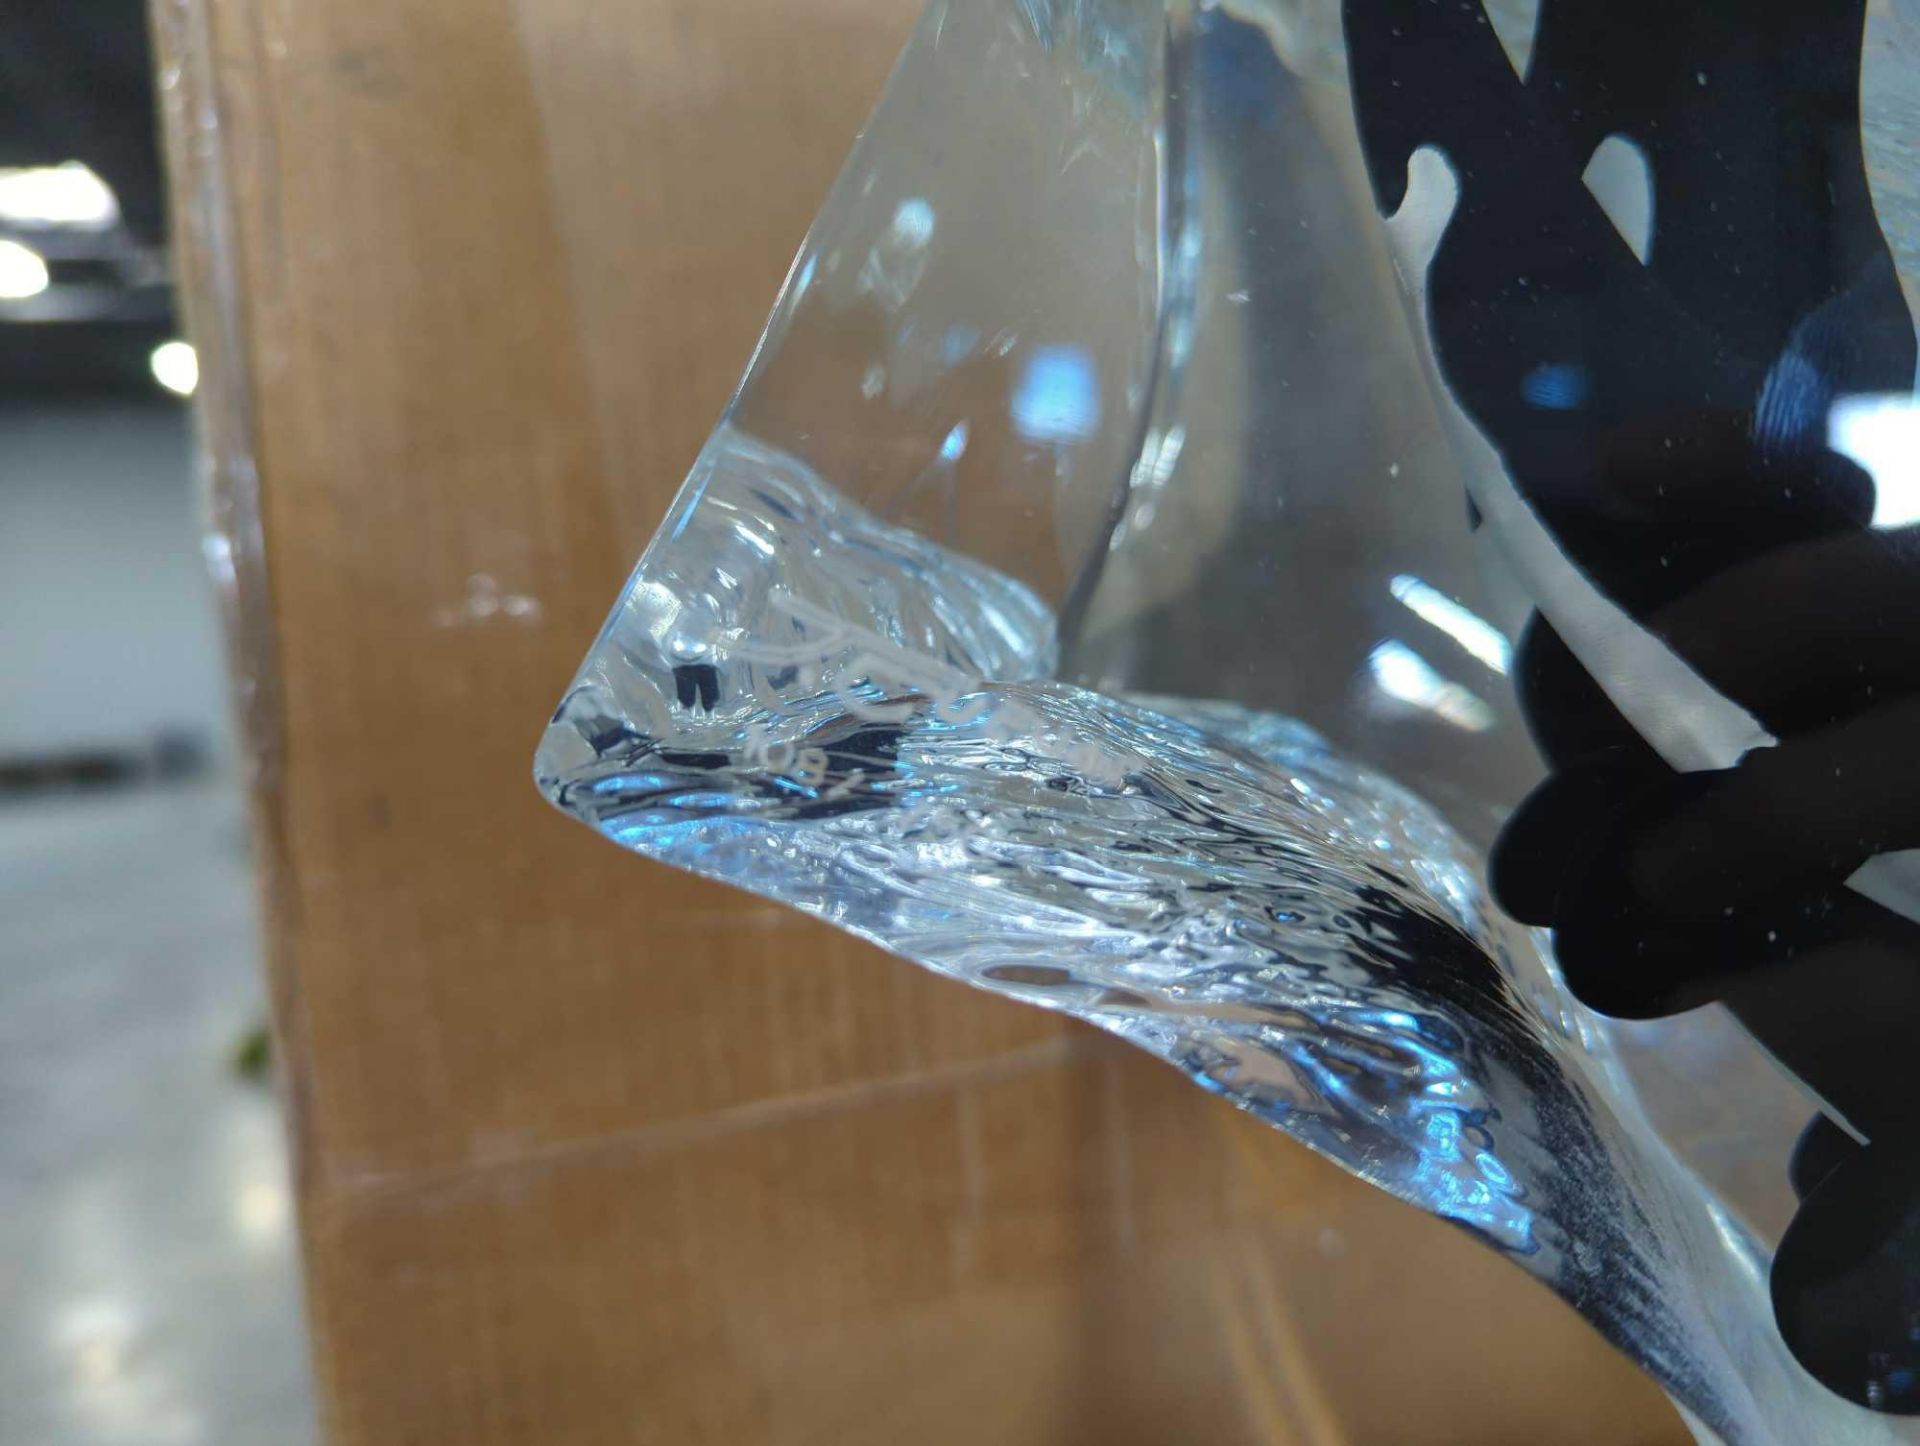 John Cuevas Limited Edition Orca Sculpture, and more - Image 4 of 10